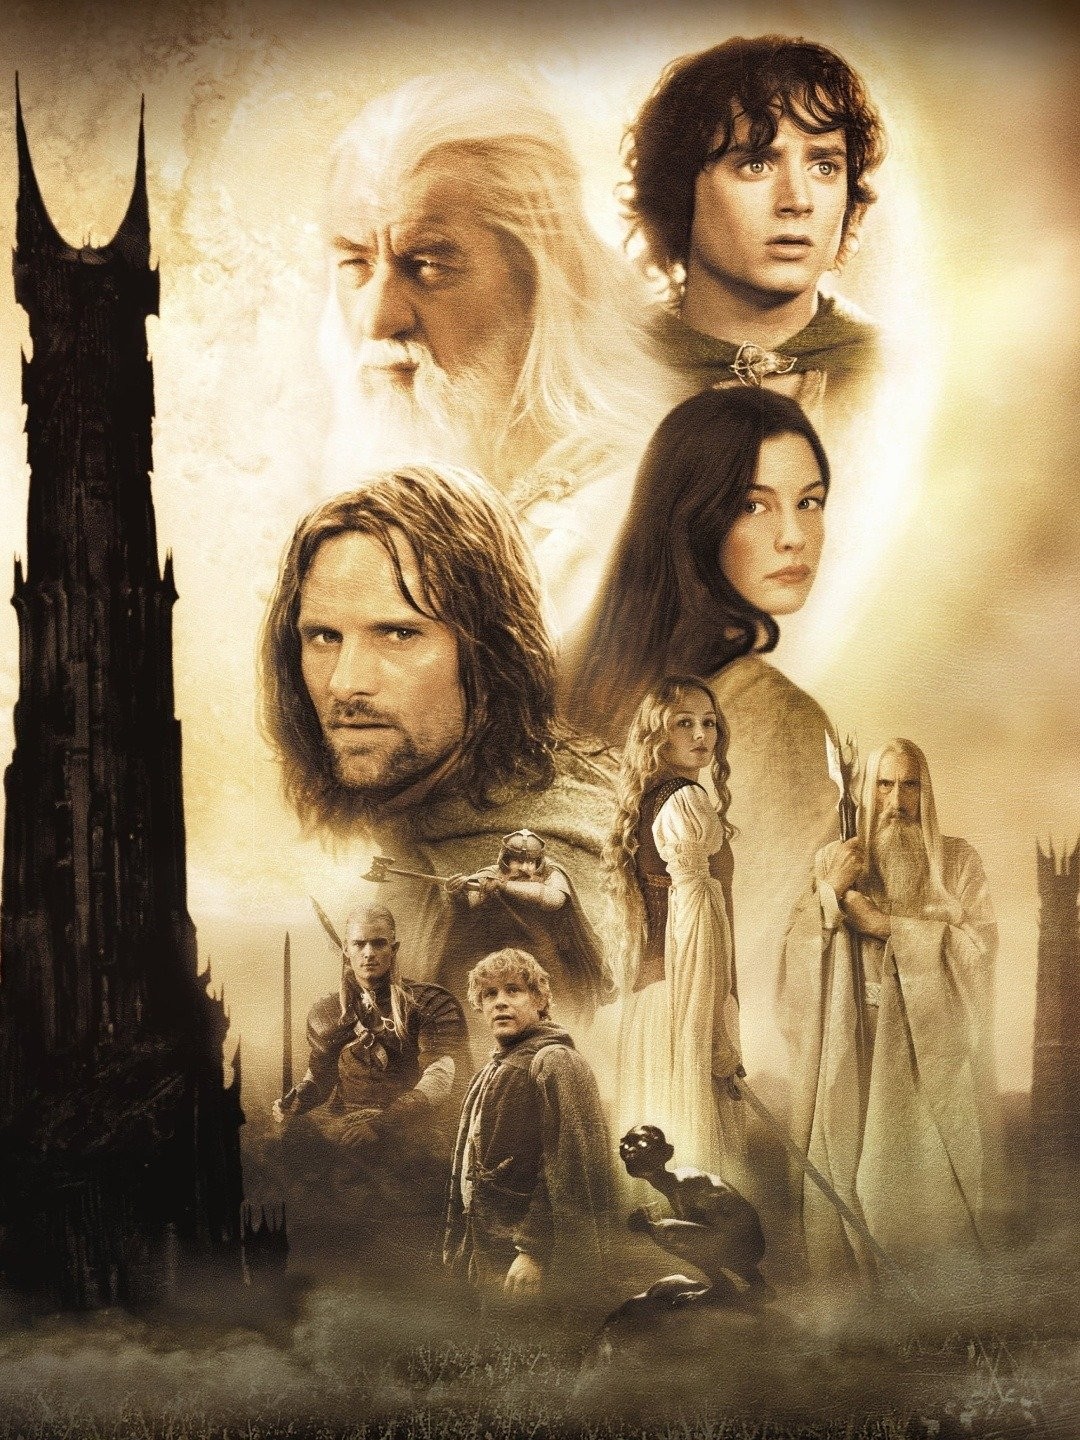 The Lord of the Rings: The Return of the King - Rotten Tomatoes